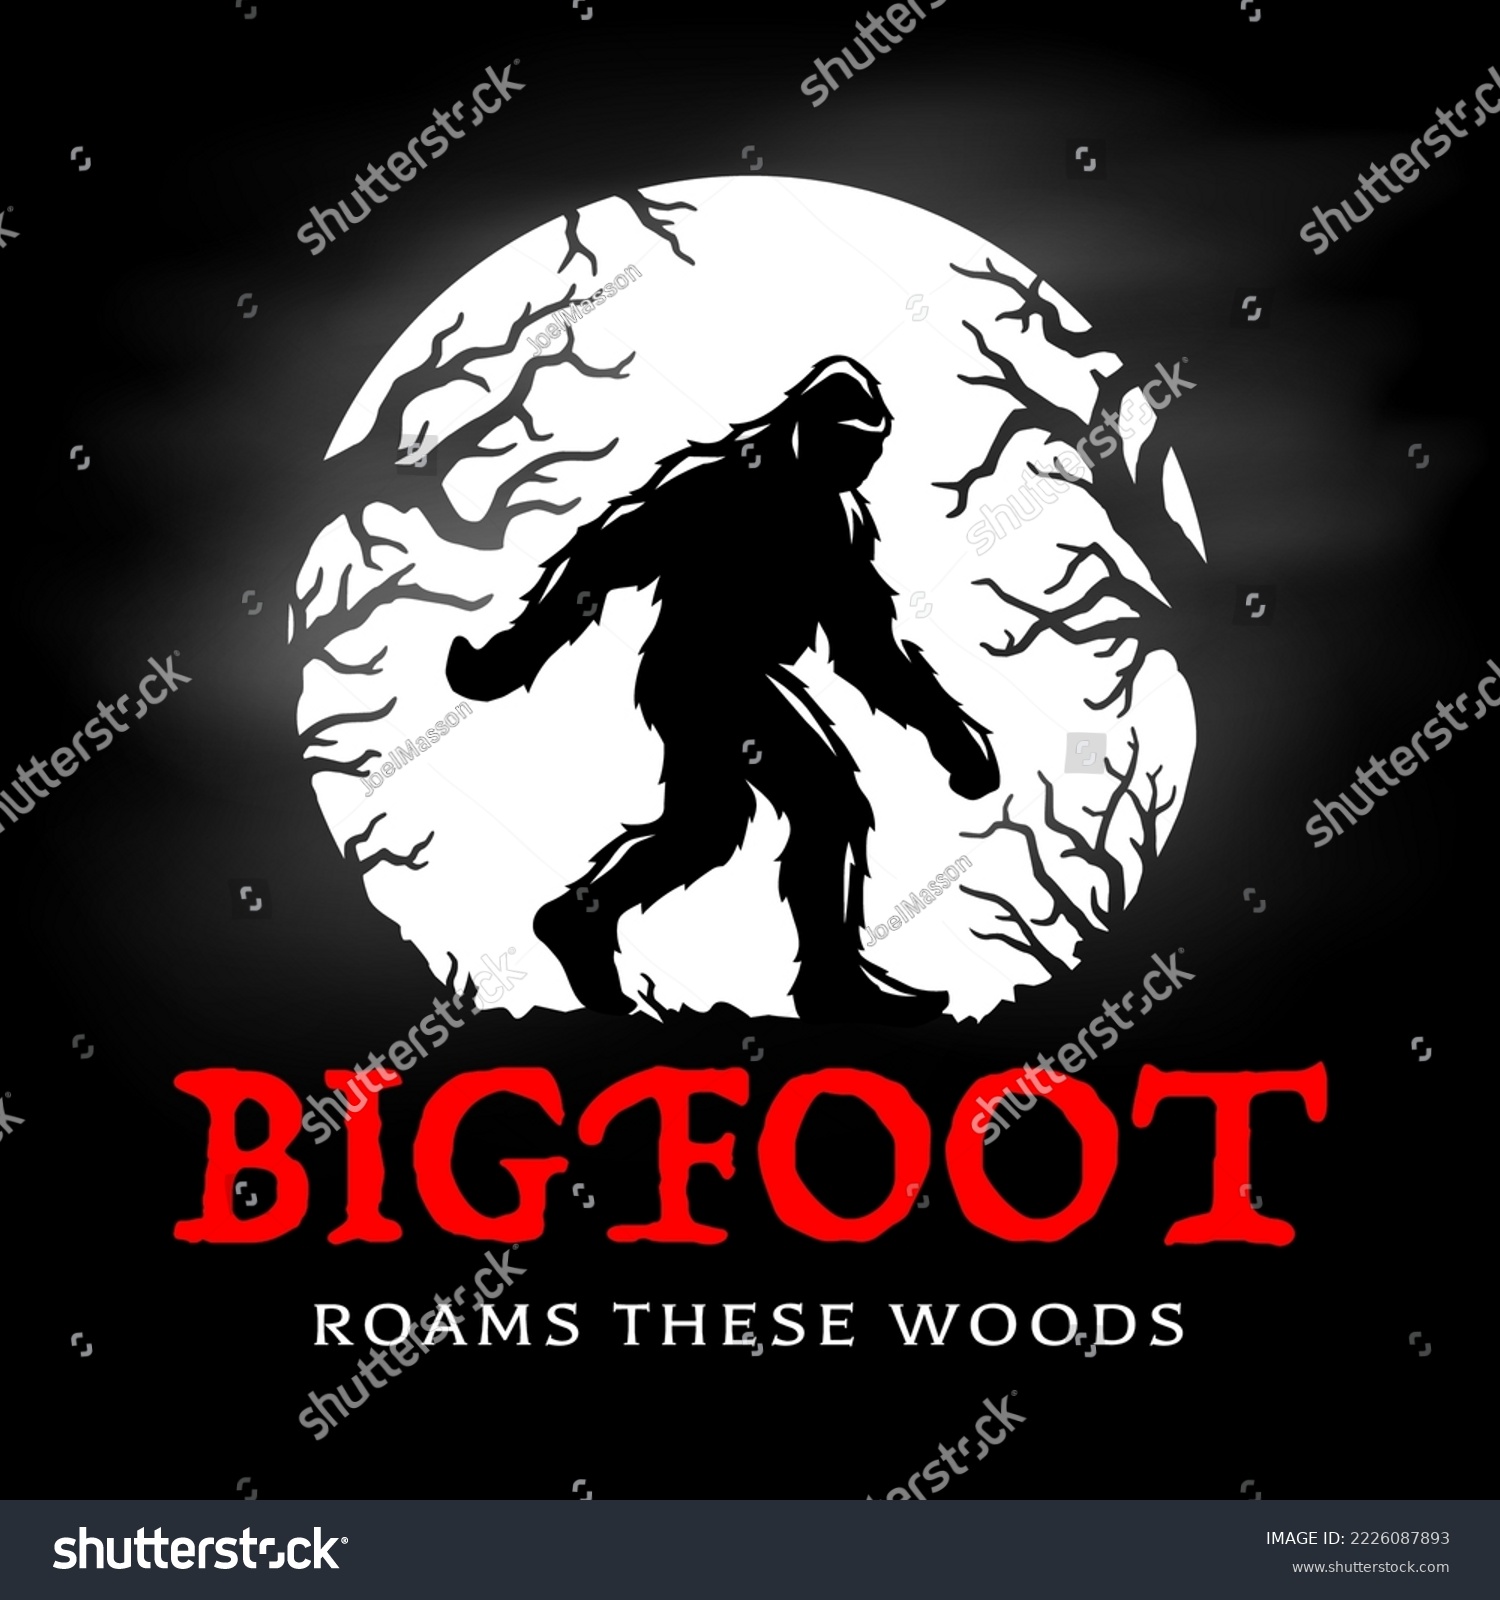 SVG of Bigfoot roams these woods graphic. Sasquatch full moon silhouette. Hairy wild man creature in the forest. Mythical cryptid skunk-ape poster. Vector illustration. svg